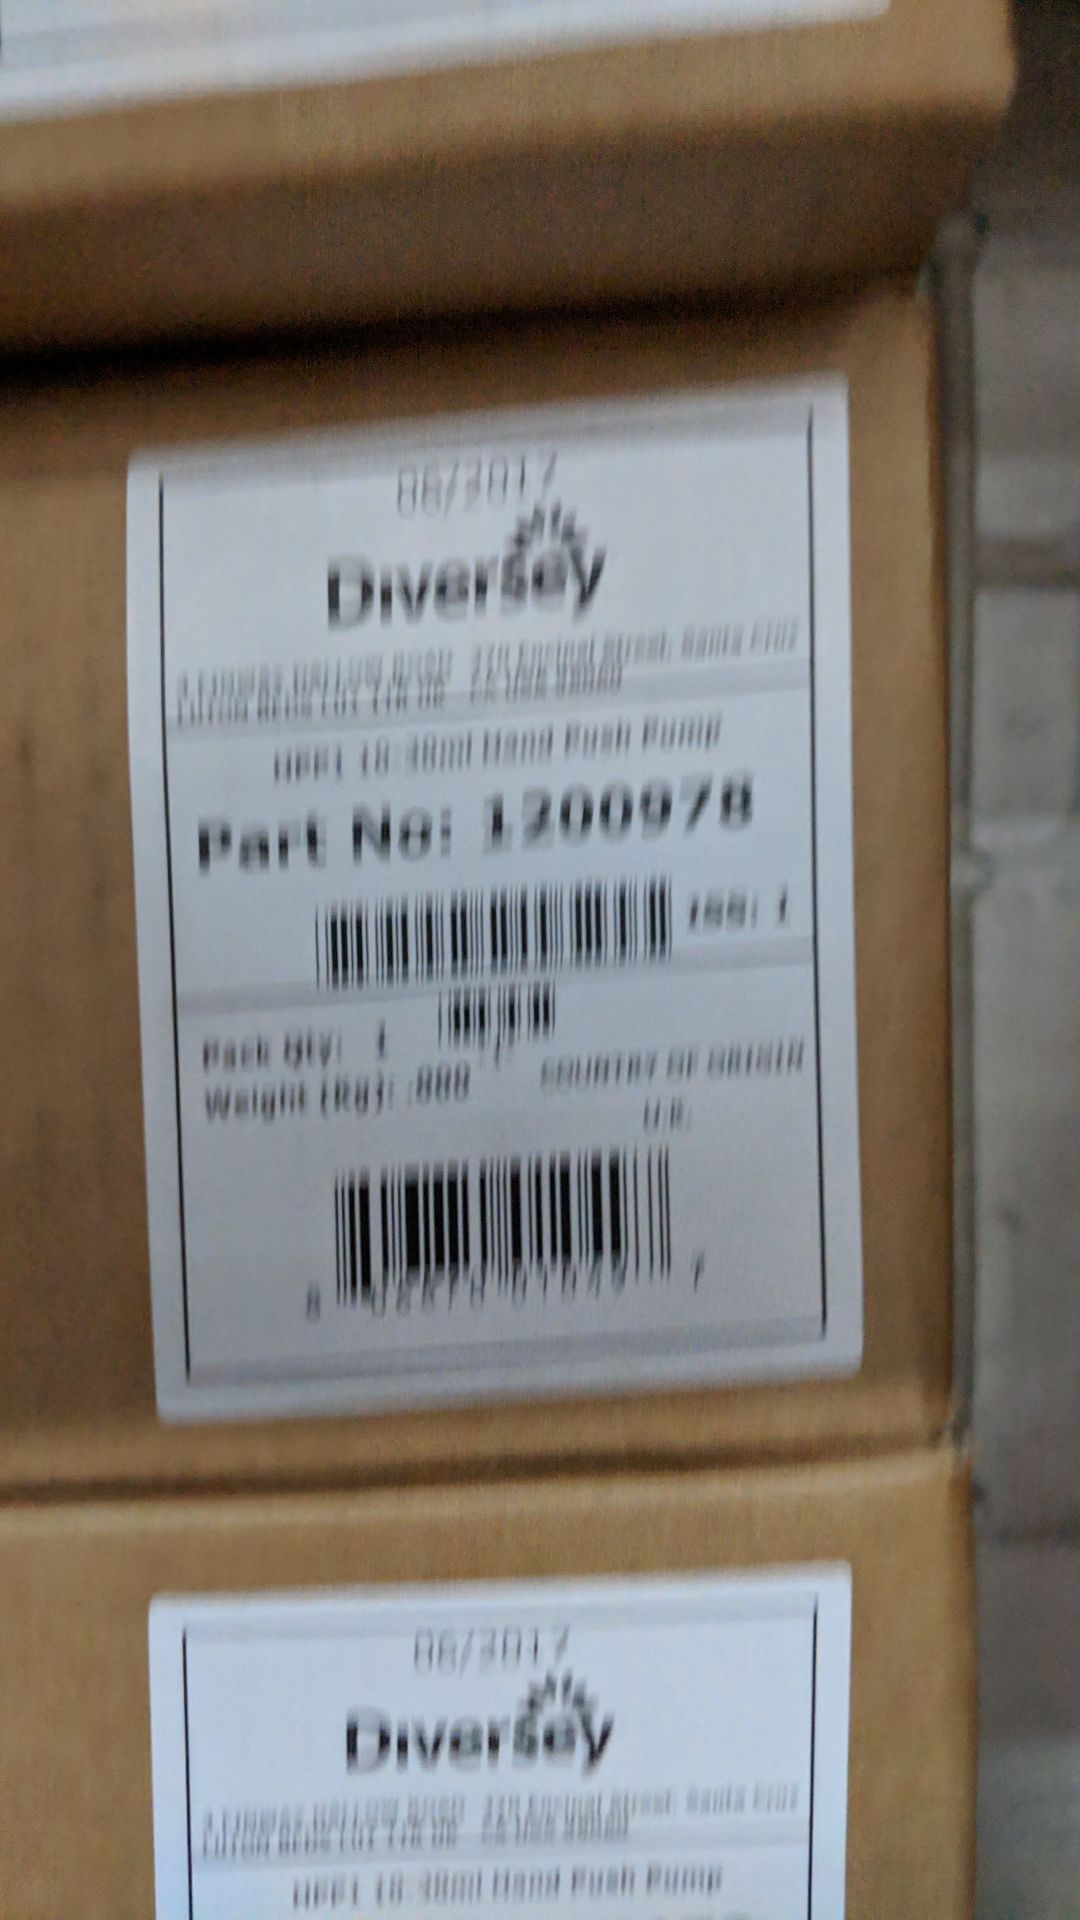 4 off Diversey hand push pumps part no. 1200978 This lot is one of a number of lots being sold on - Image 5 of 6